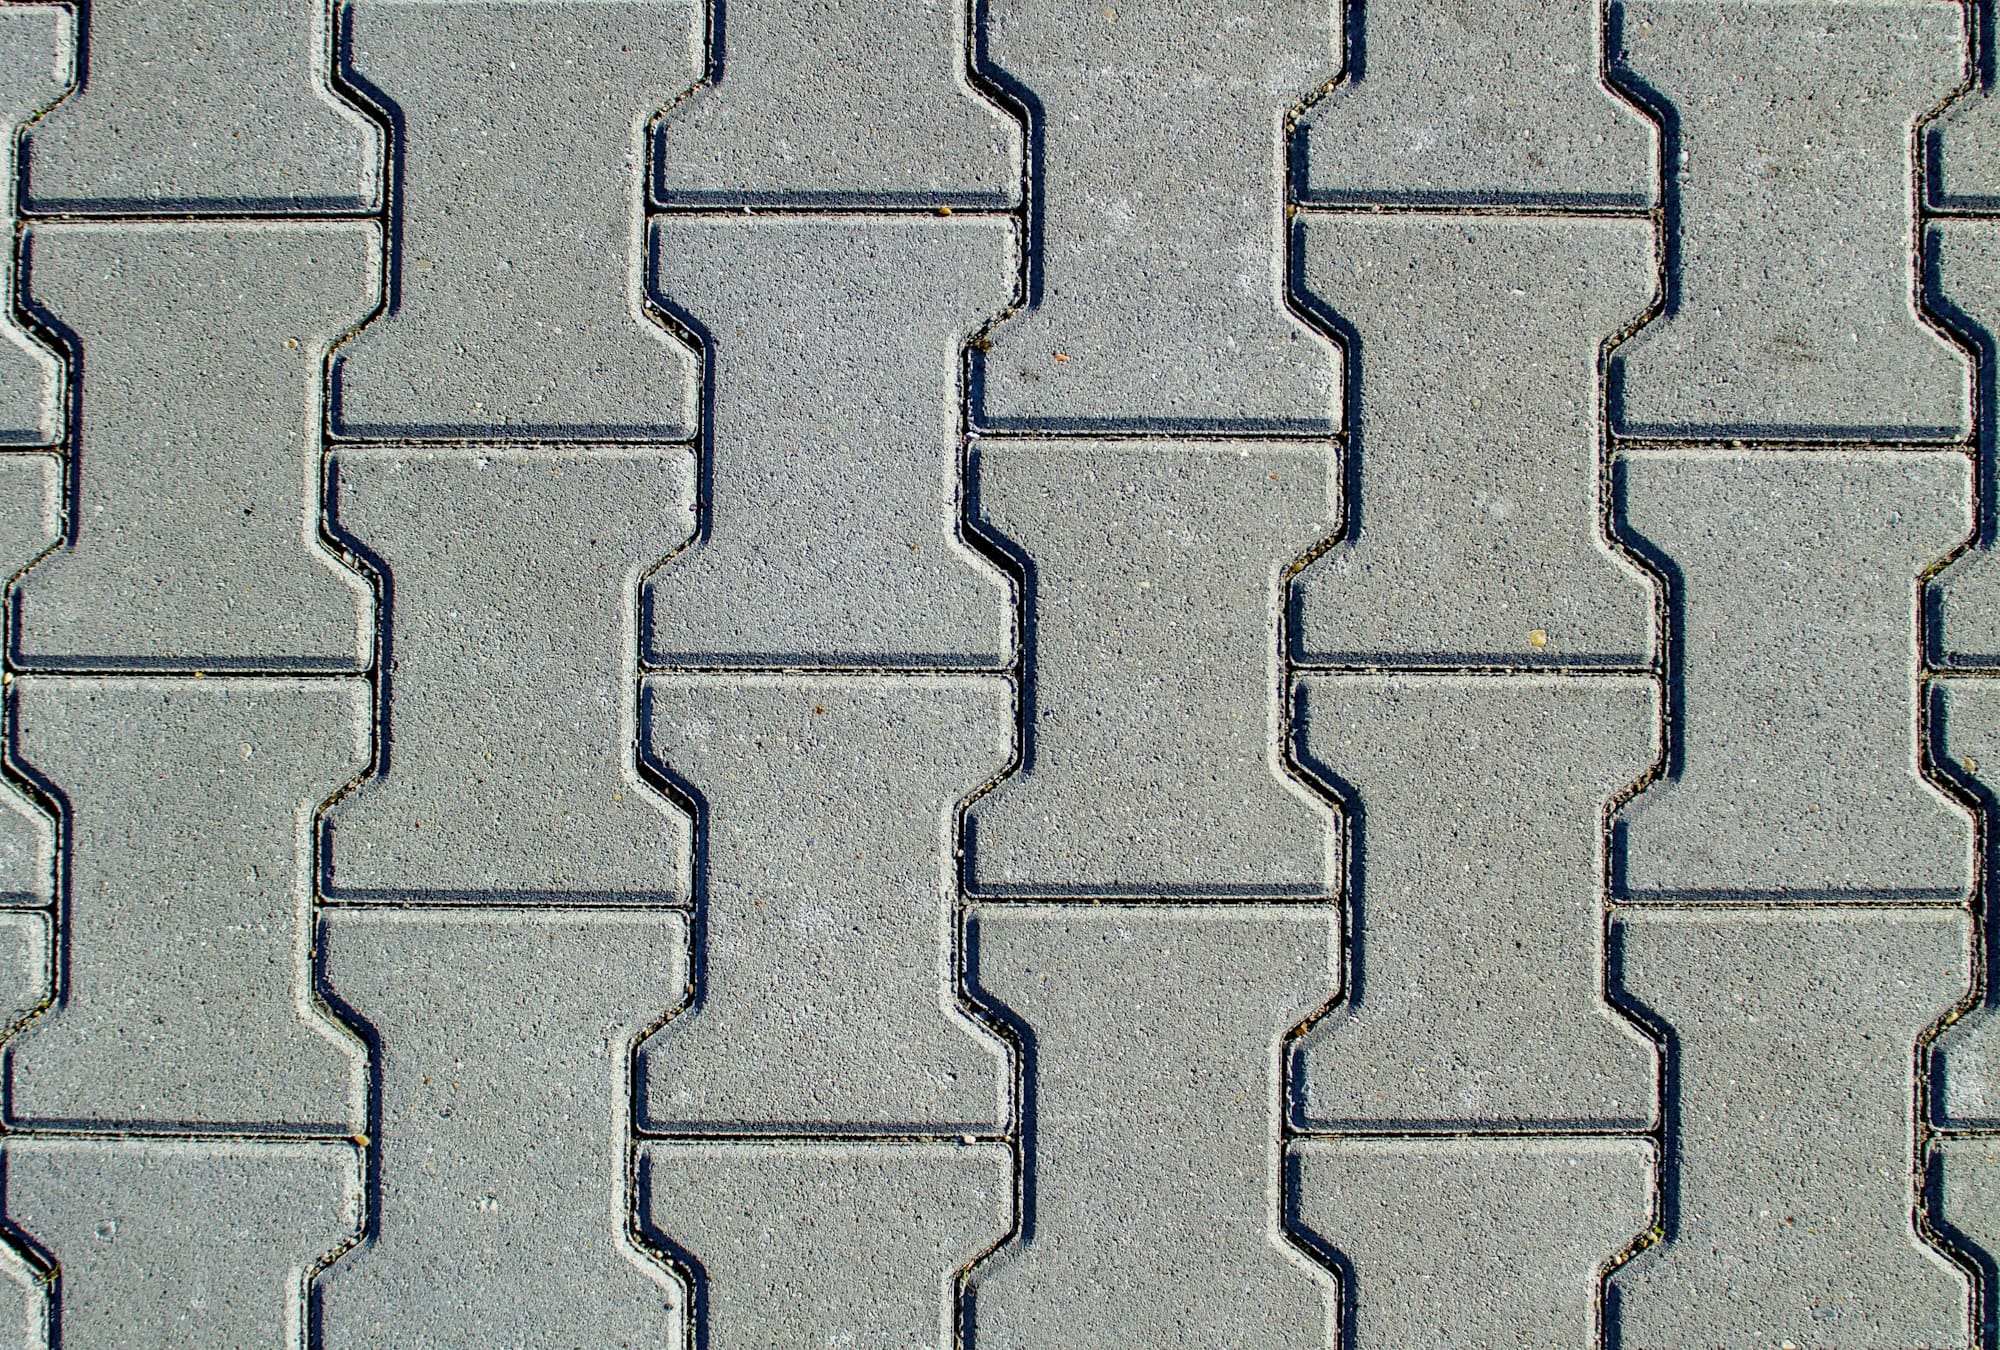 Texture of concrete pavement or sidewalk with paving slabs